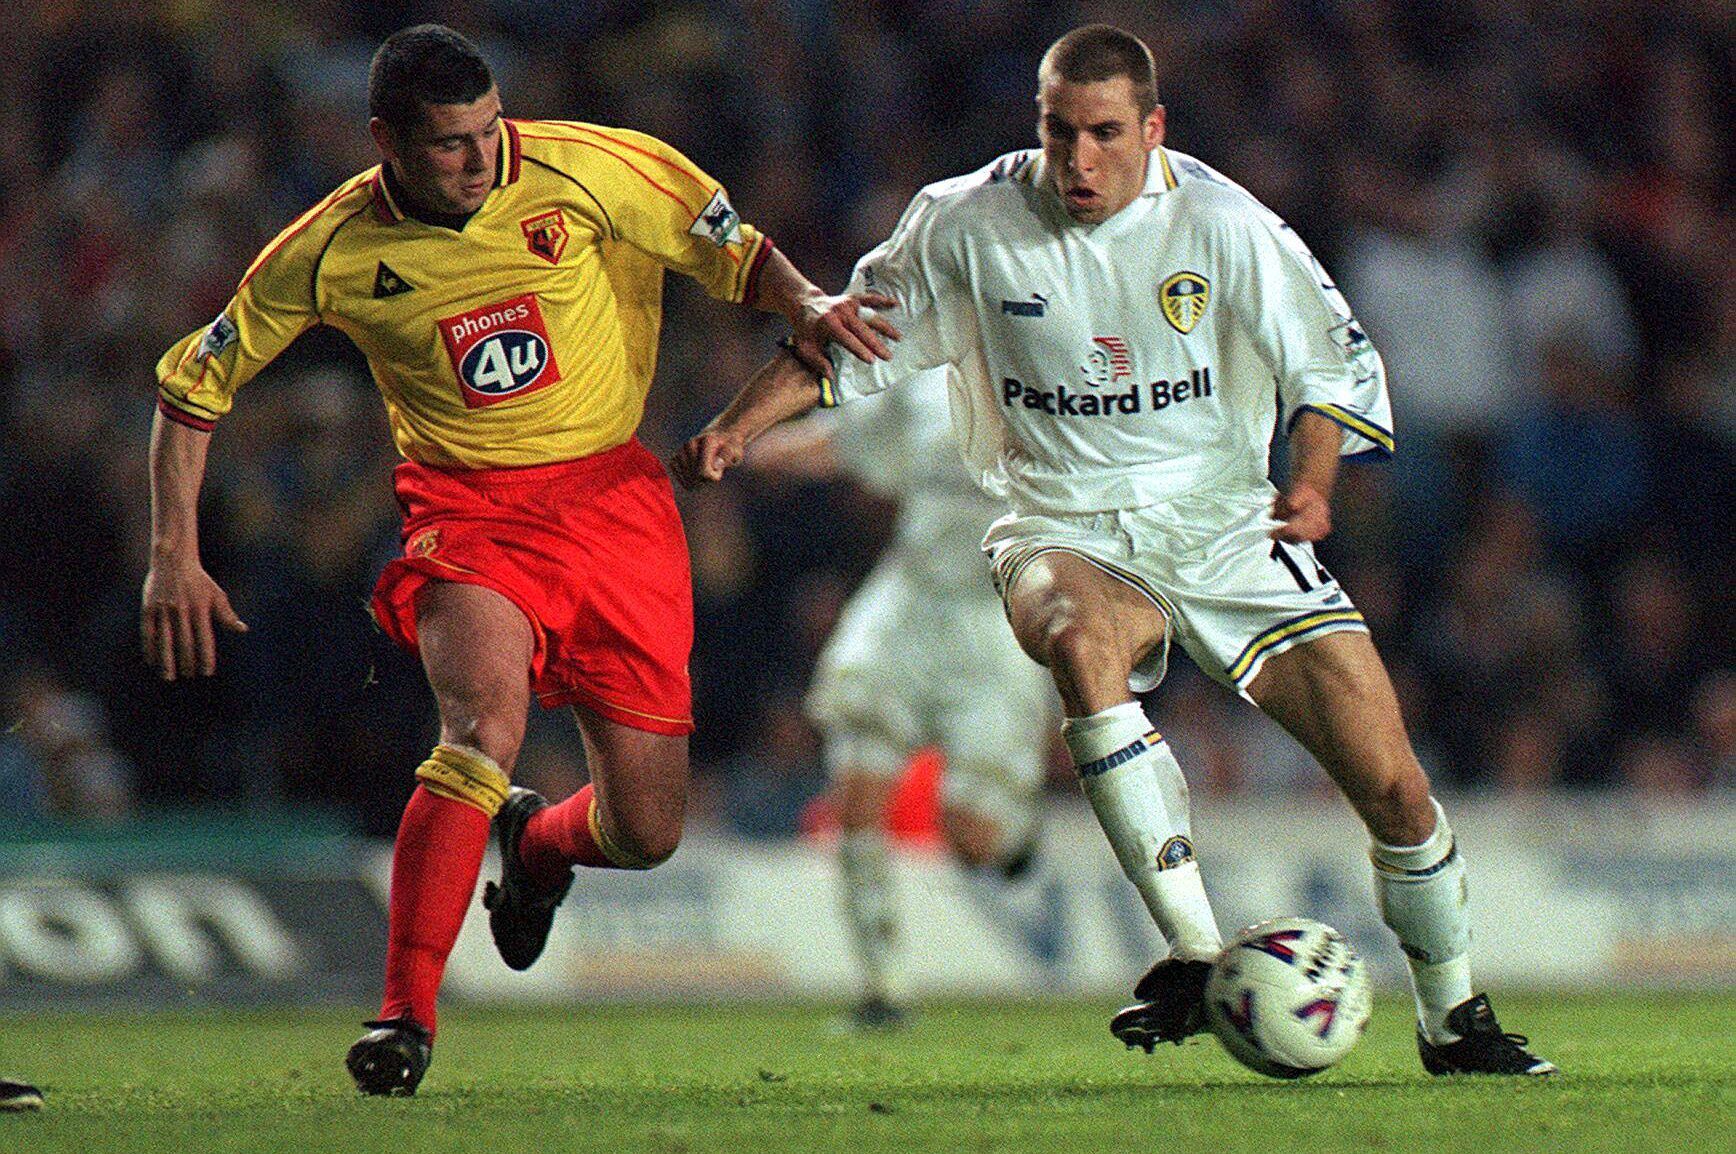 Football - Leed United v Watford , FA Premier League  3/5/00 
Mandatory Credit:Action Images/David Davies 
Leeds' Darren Huckerby is challenged by Watford's Paul Robinson.